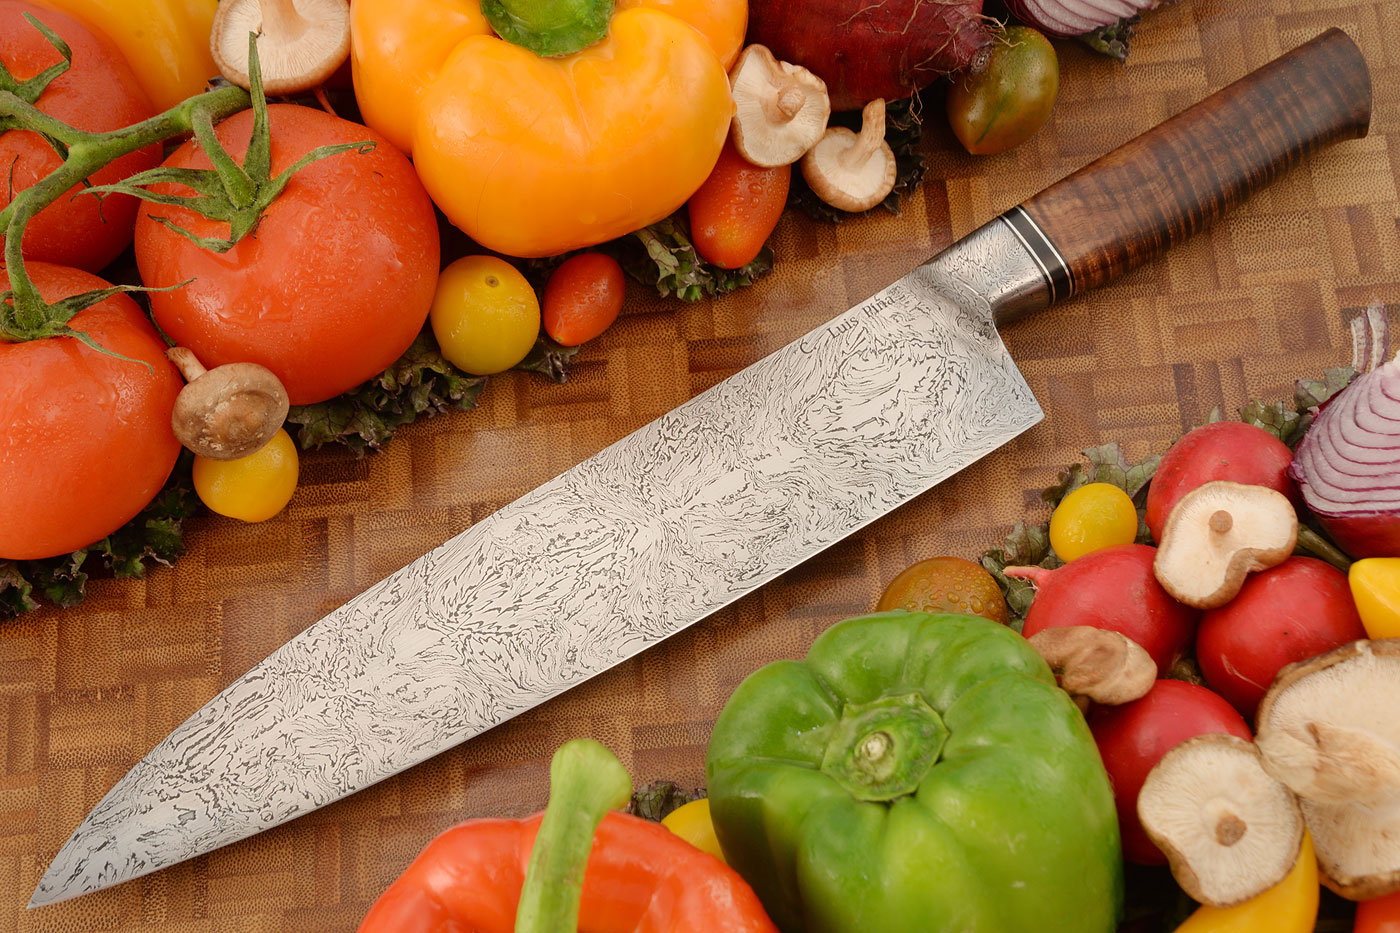 Integral Mosaic Damascus Chef's Knife (10 in.) with Tasmanian Blackwood